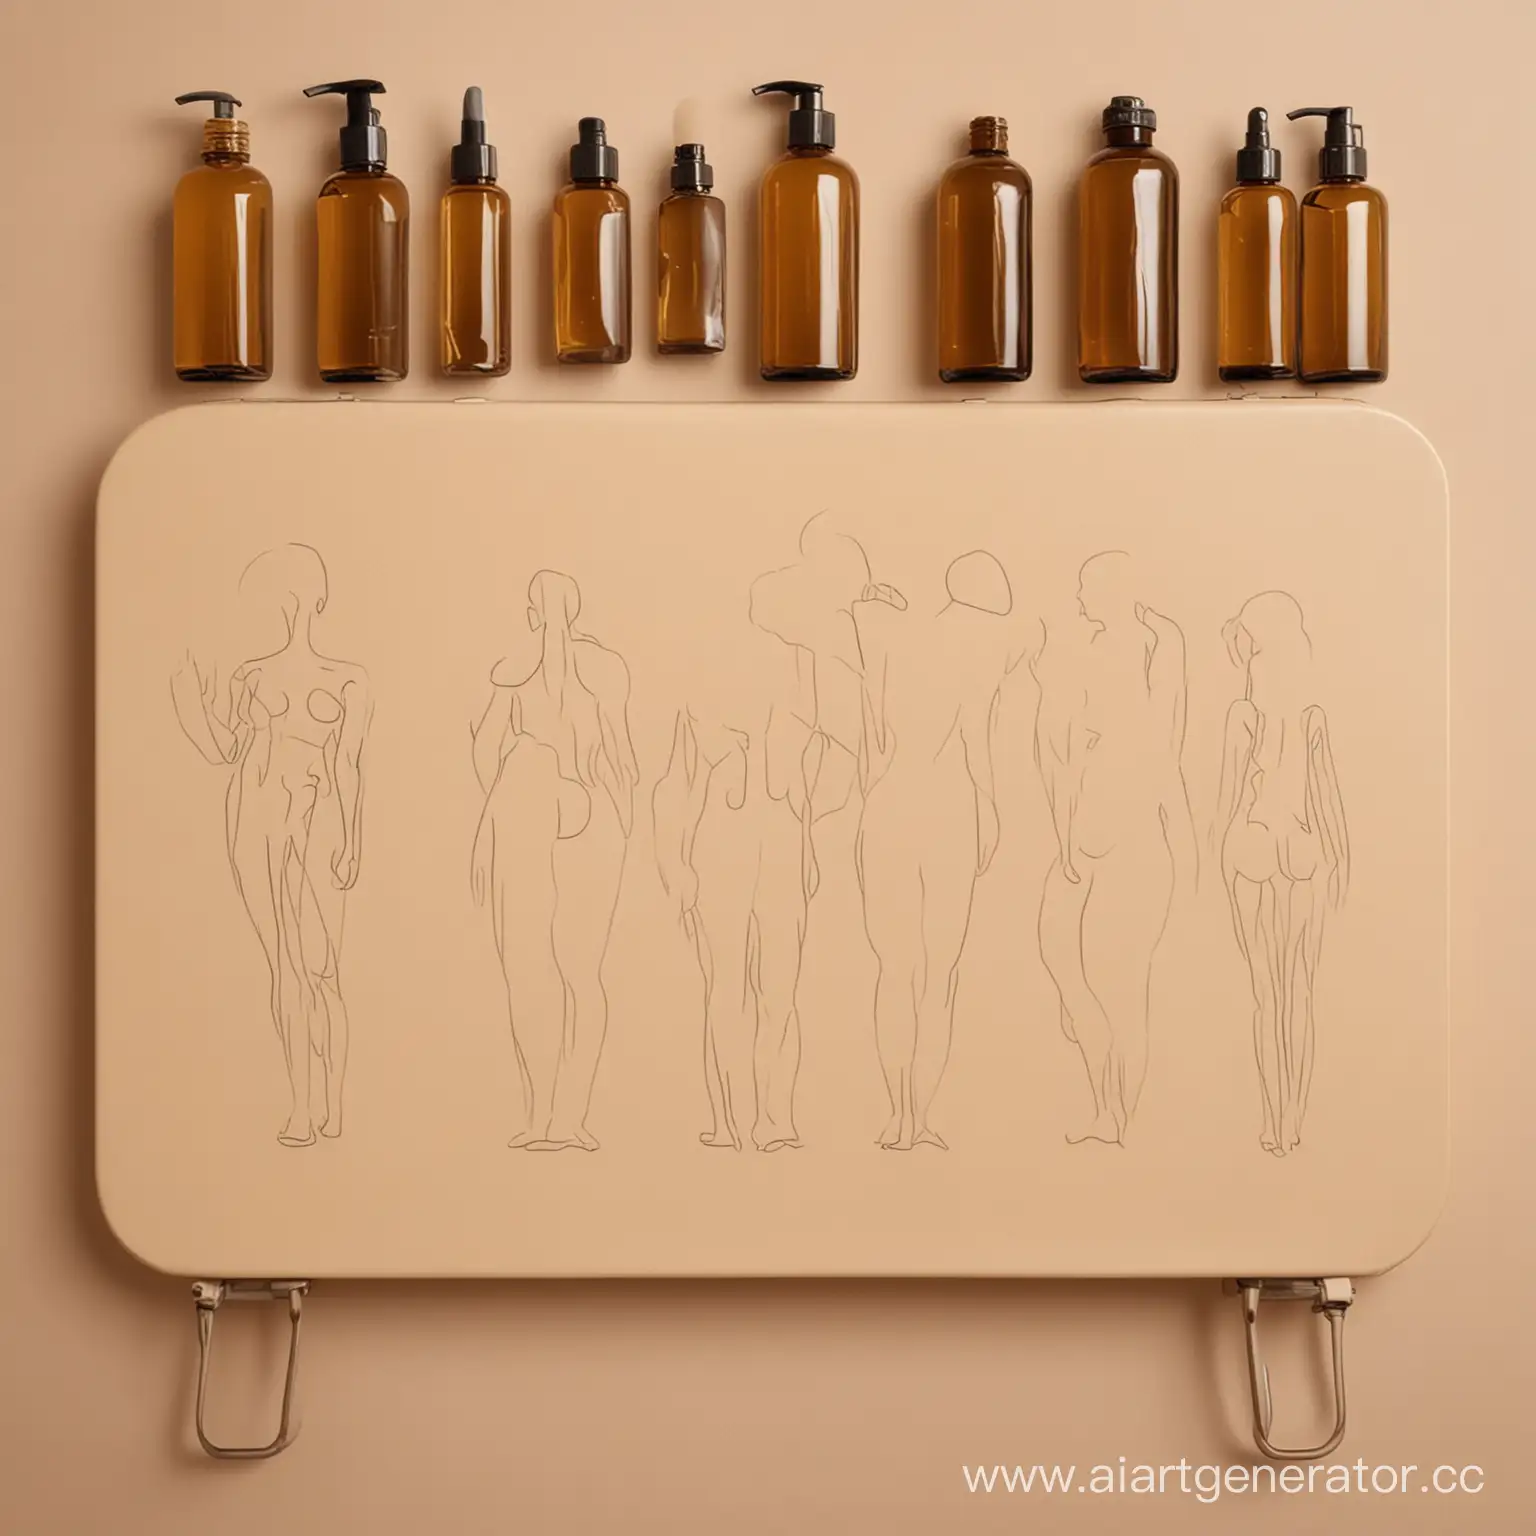 Massage-Table-with-Bottles-of-Oil-and-Silhouettes-of-Figures